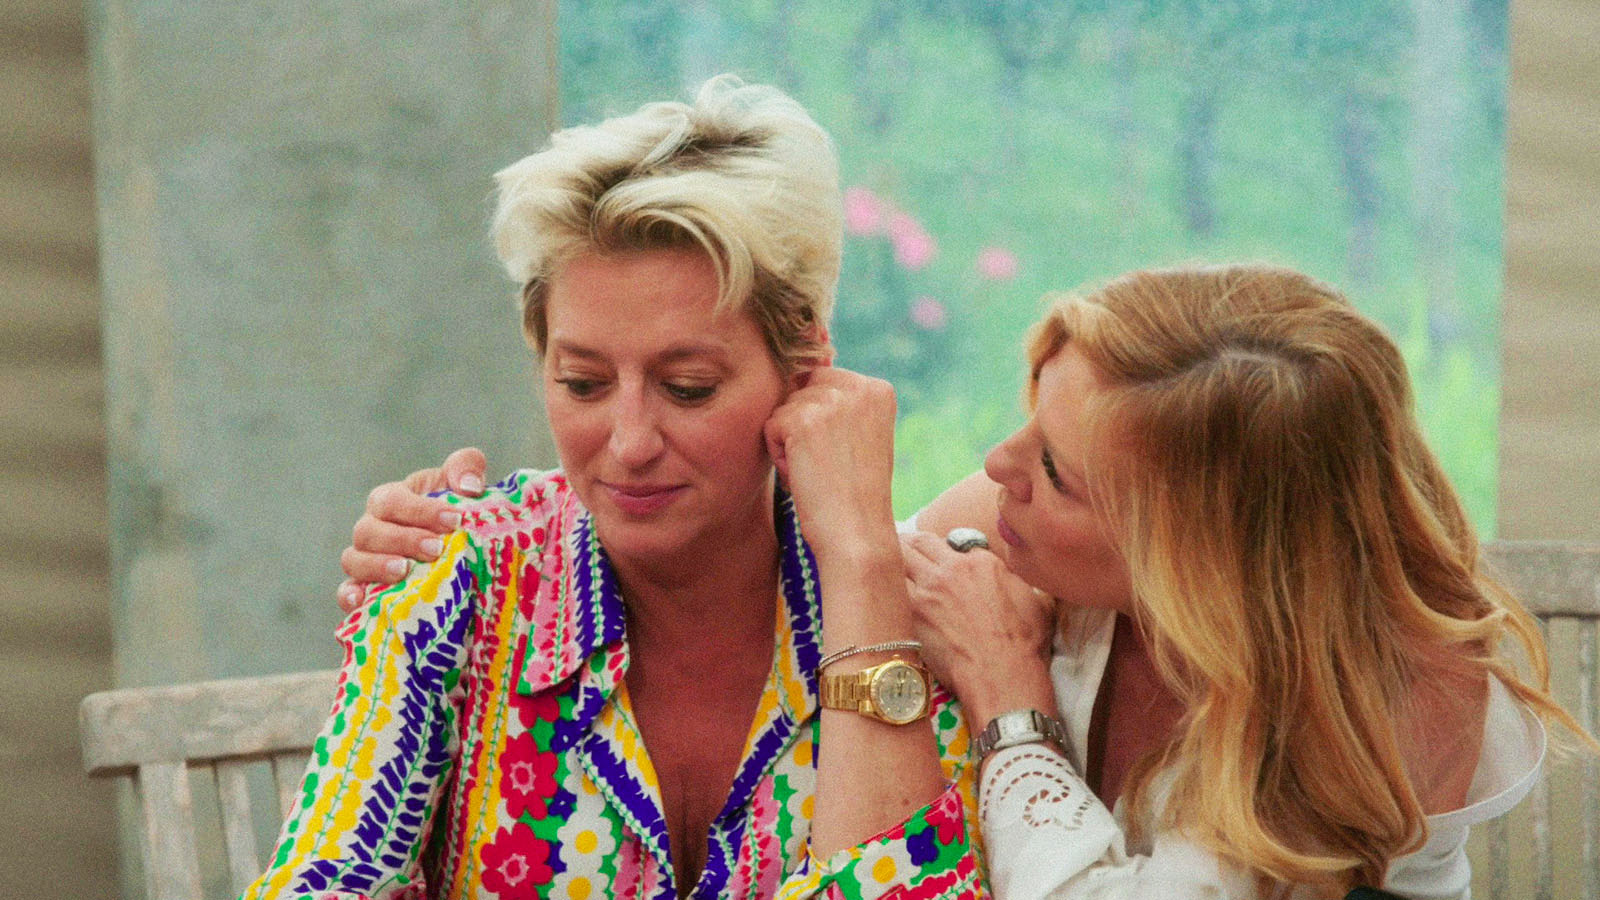 RHONY The Real Housewives of New York City S12E03 saison 12 épisode 3 Don't Mansion It